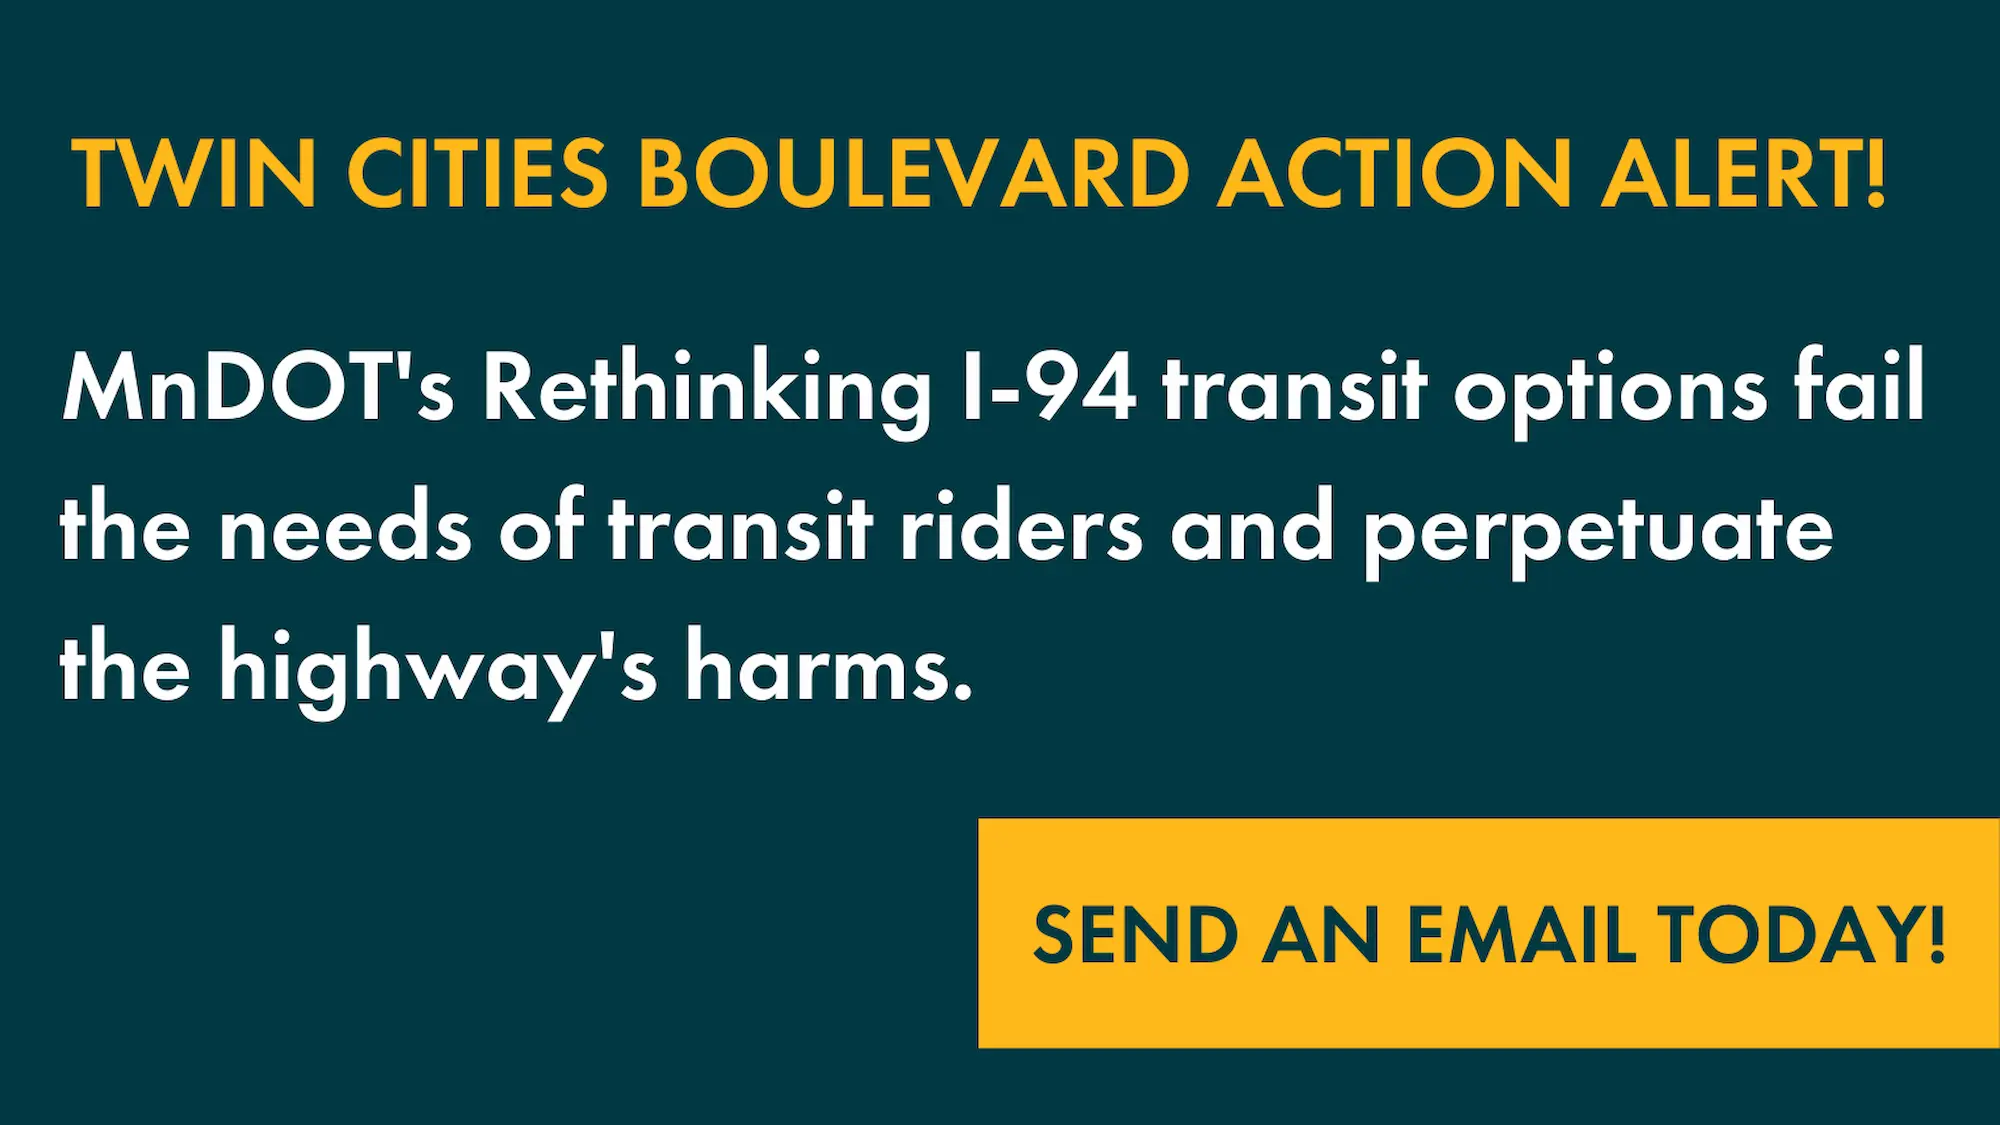 image with text that reads "Twin Cities Boulevard Action Alert! MnDOT's Rethinking I-94 transit options fail the needs of transit riders and perpetuate the highway's harms